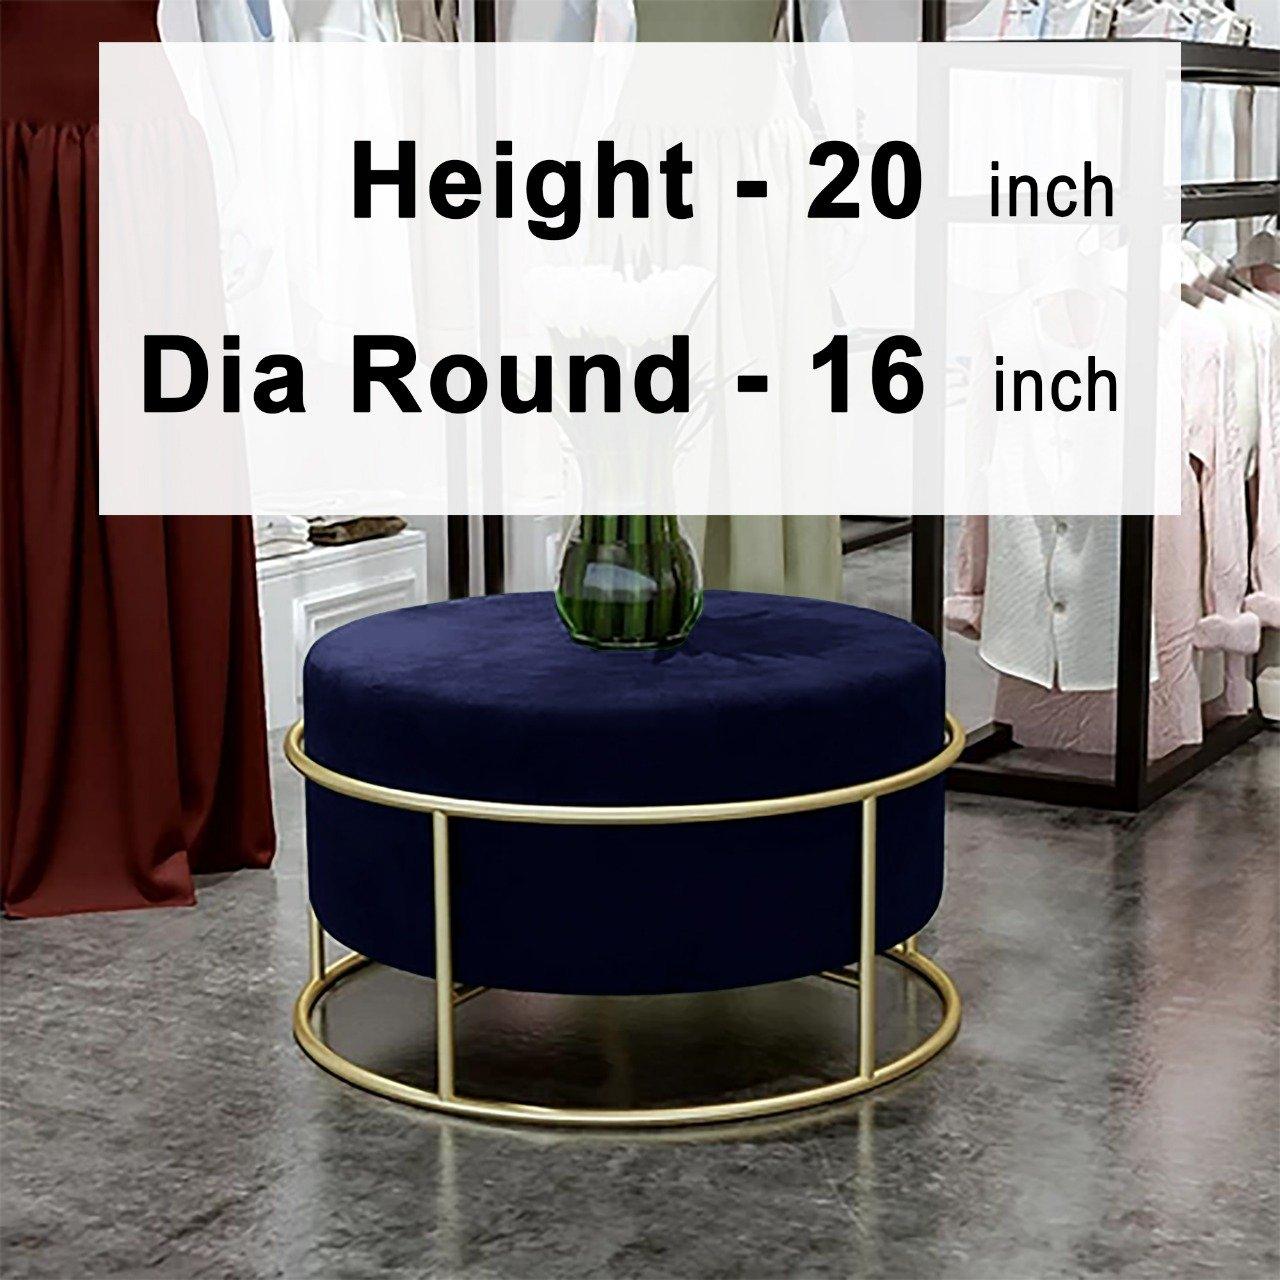 Luxury Wooden Round stool With Steel Stand -299 - 92Bedding